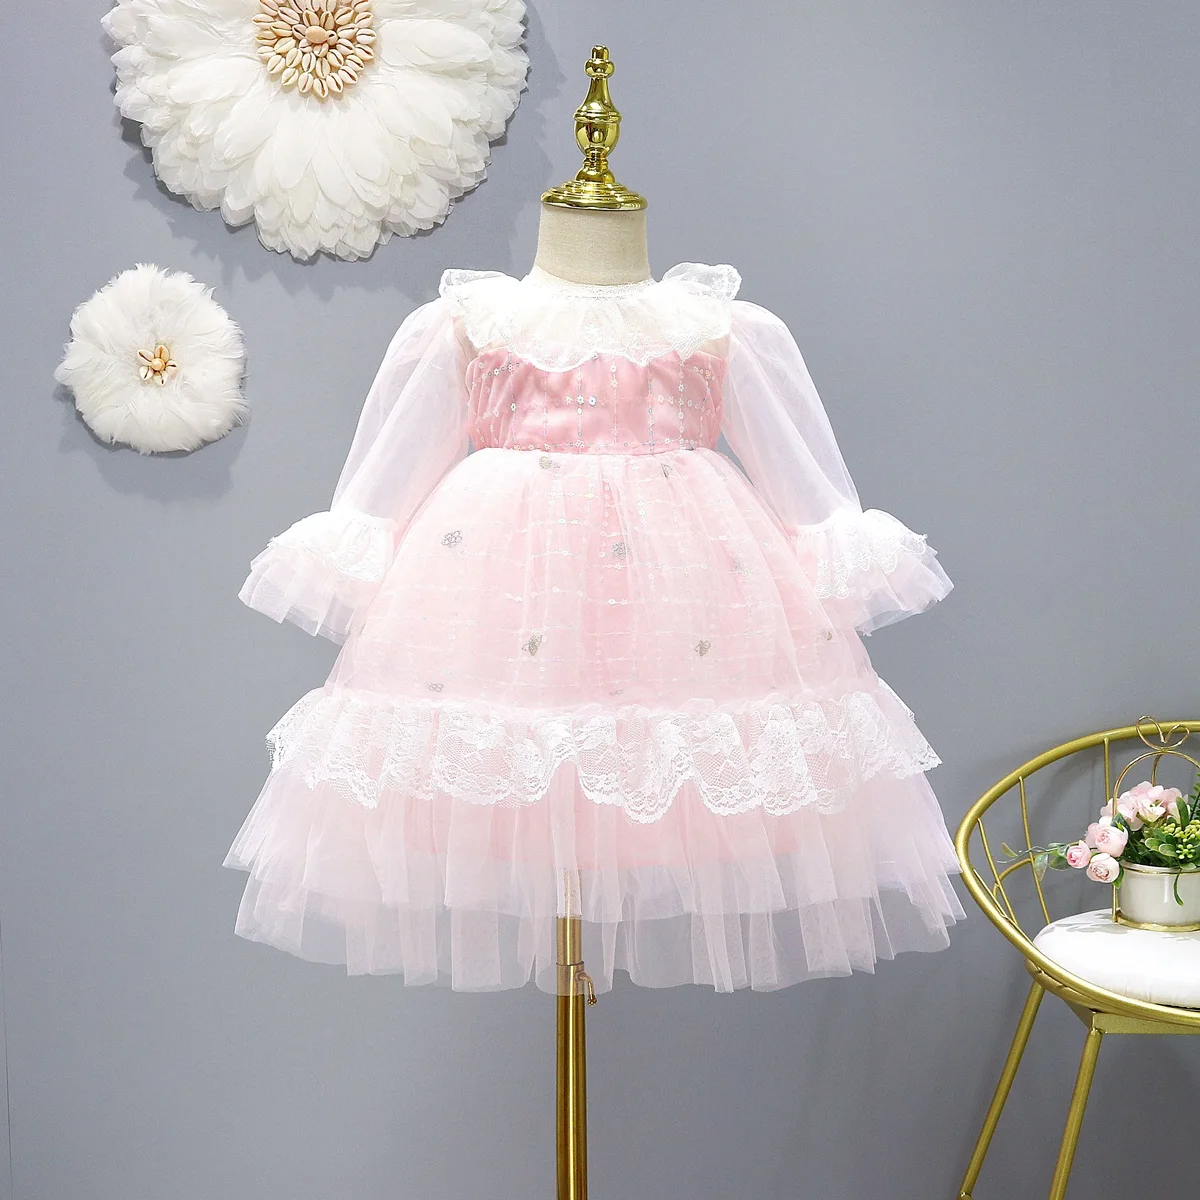 Baby Girls Dress Kids Clothes Princess Costume Maid Cosplay Spring Autumn 1-7 Years Party Dresses For Girl Children's Clothing